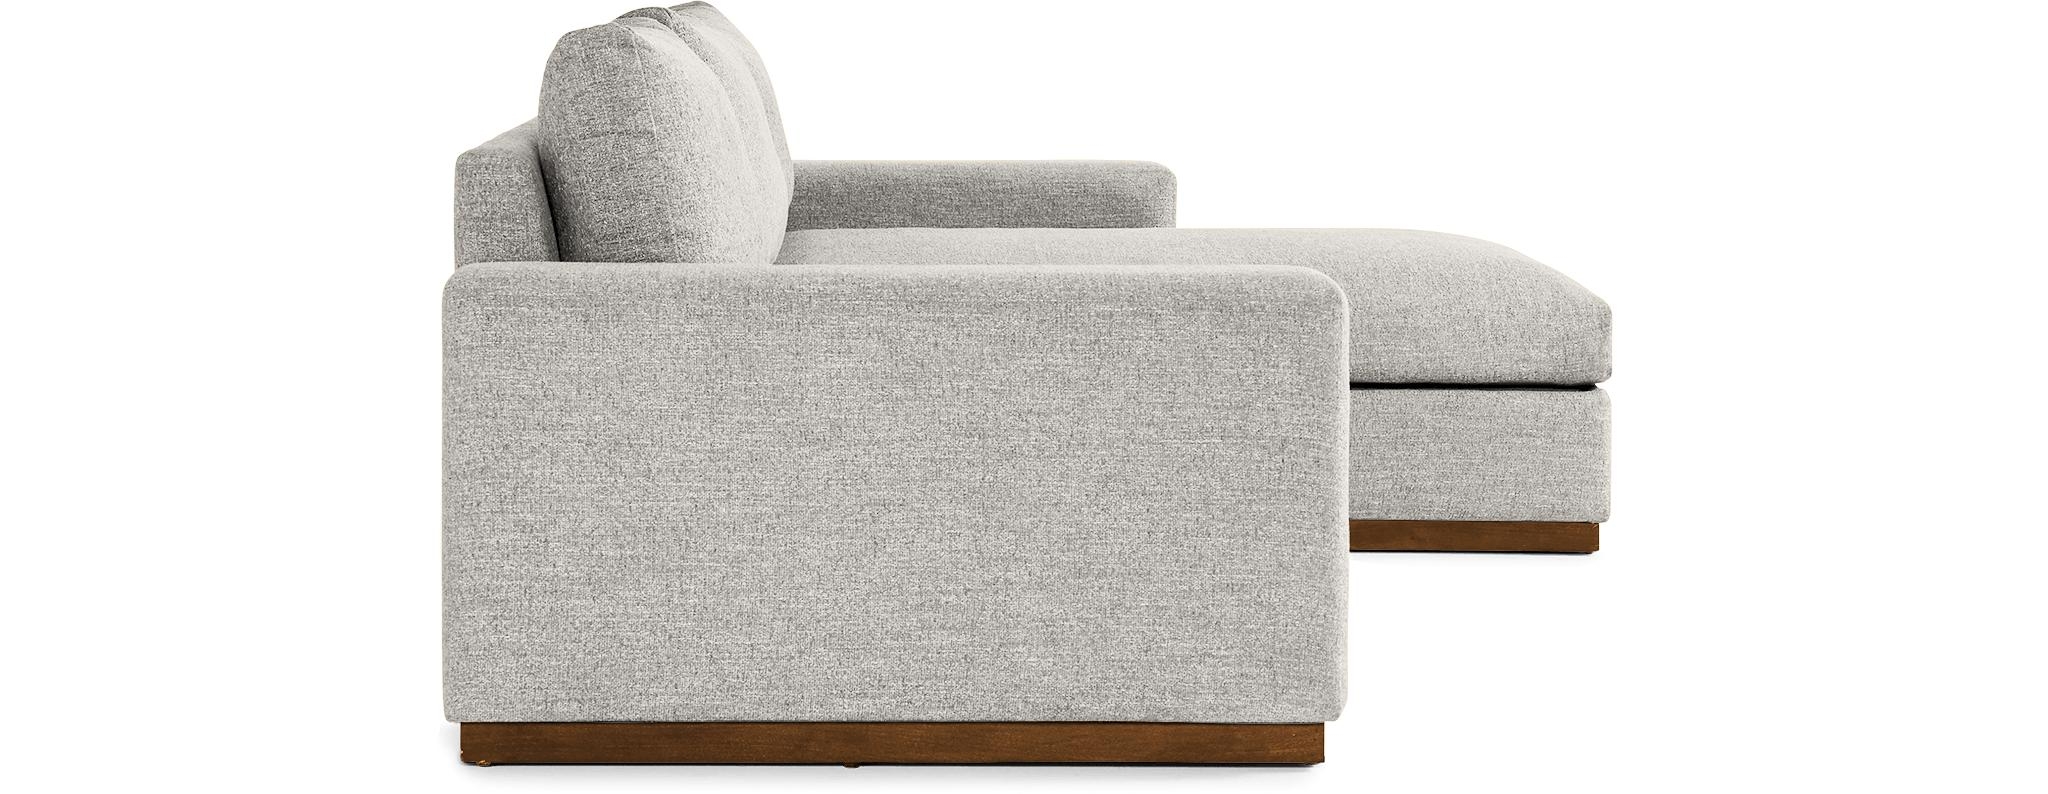 White Holt Mid Century Modern Sectional with Storage - Tussah Snow - Mocha - Right - Image 2